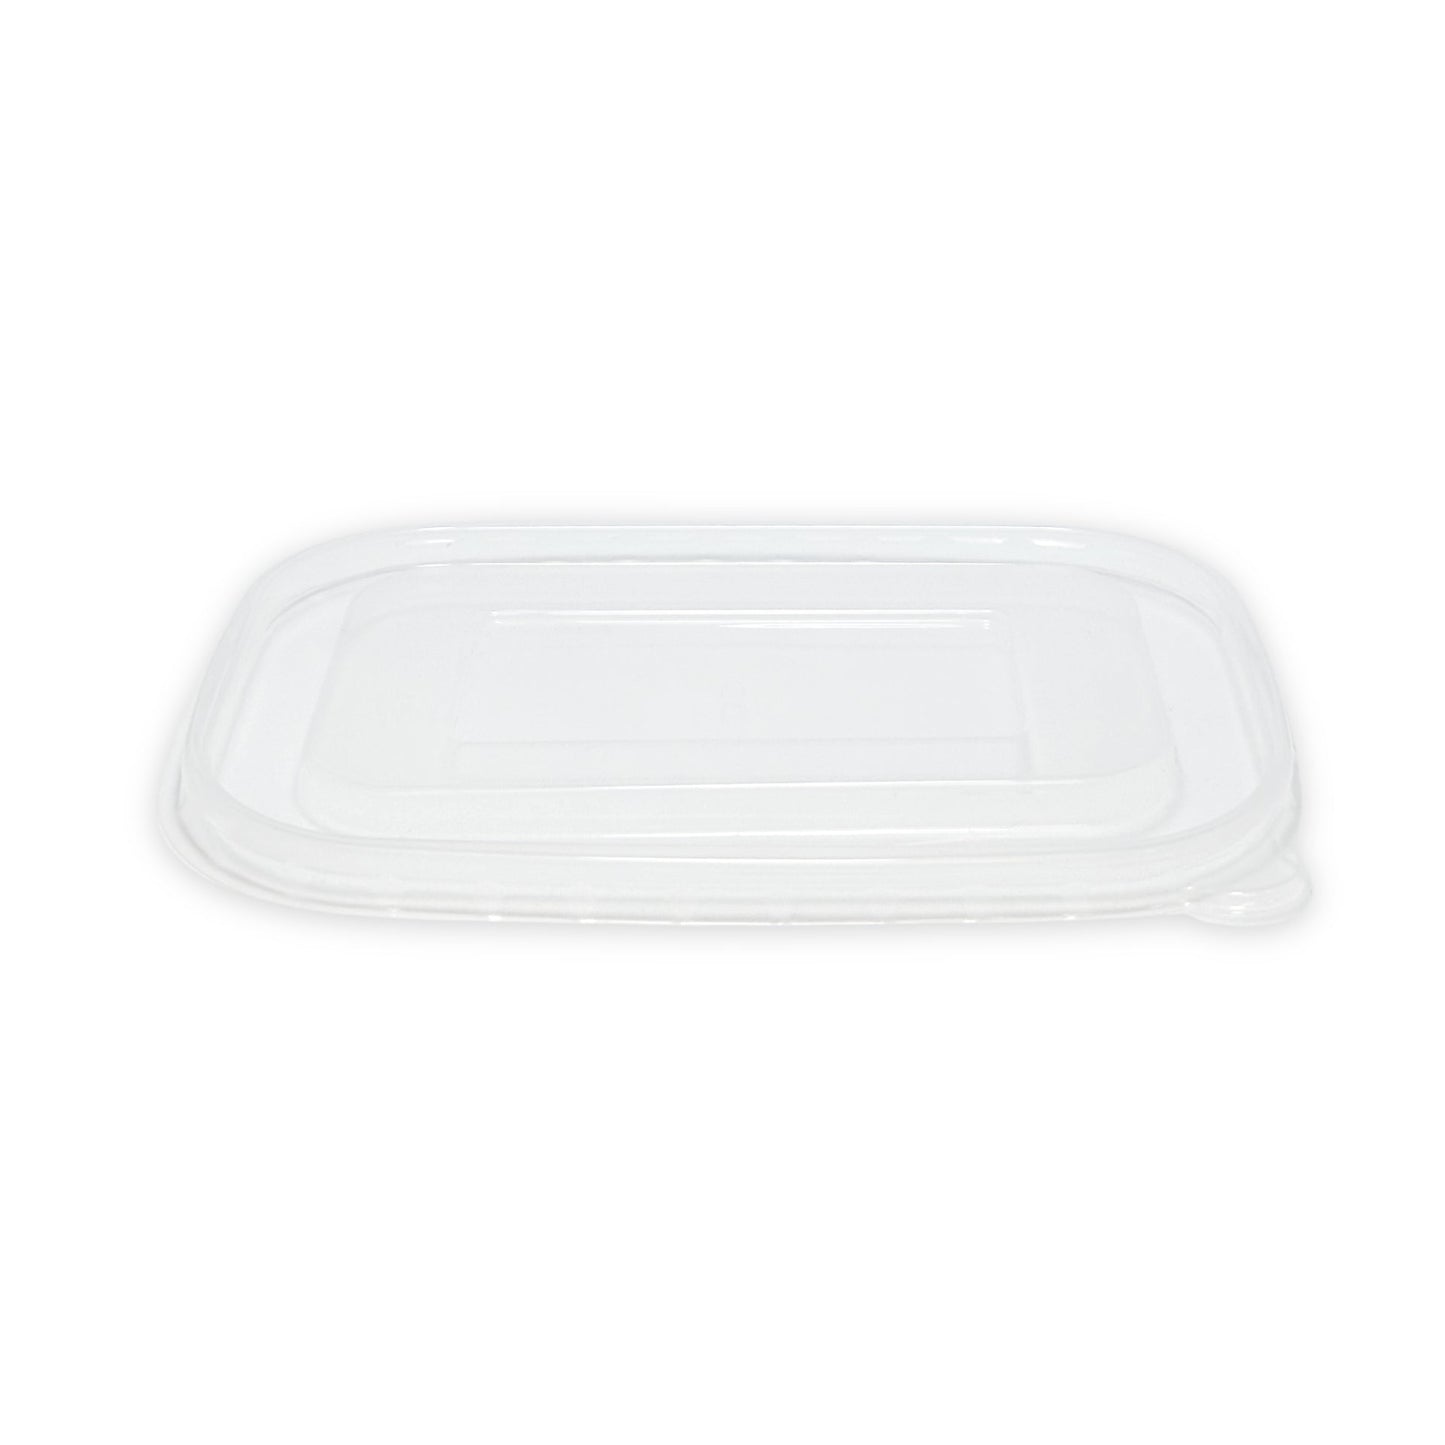 KIS-PL475 | PP Lids for 17oz-34oz Kraft Paper Rectangle Containers; From $0.095/pc